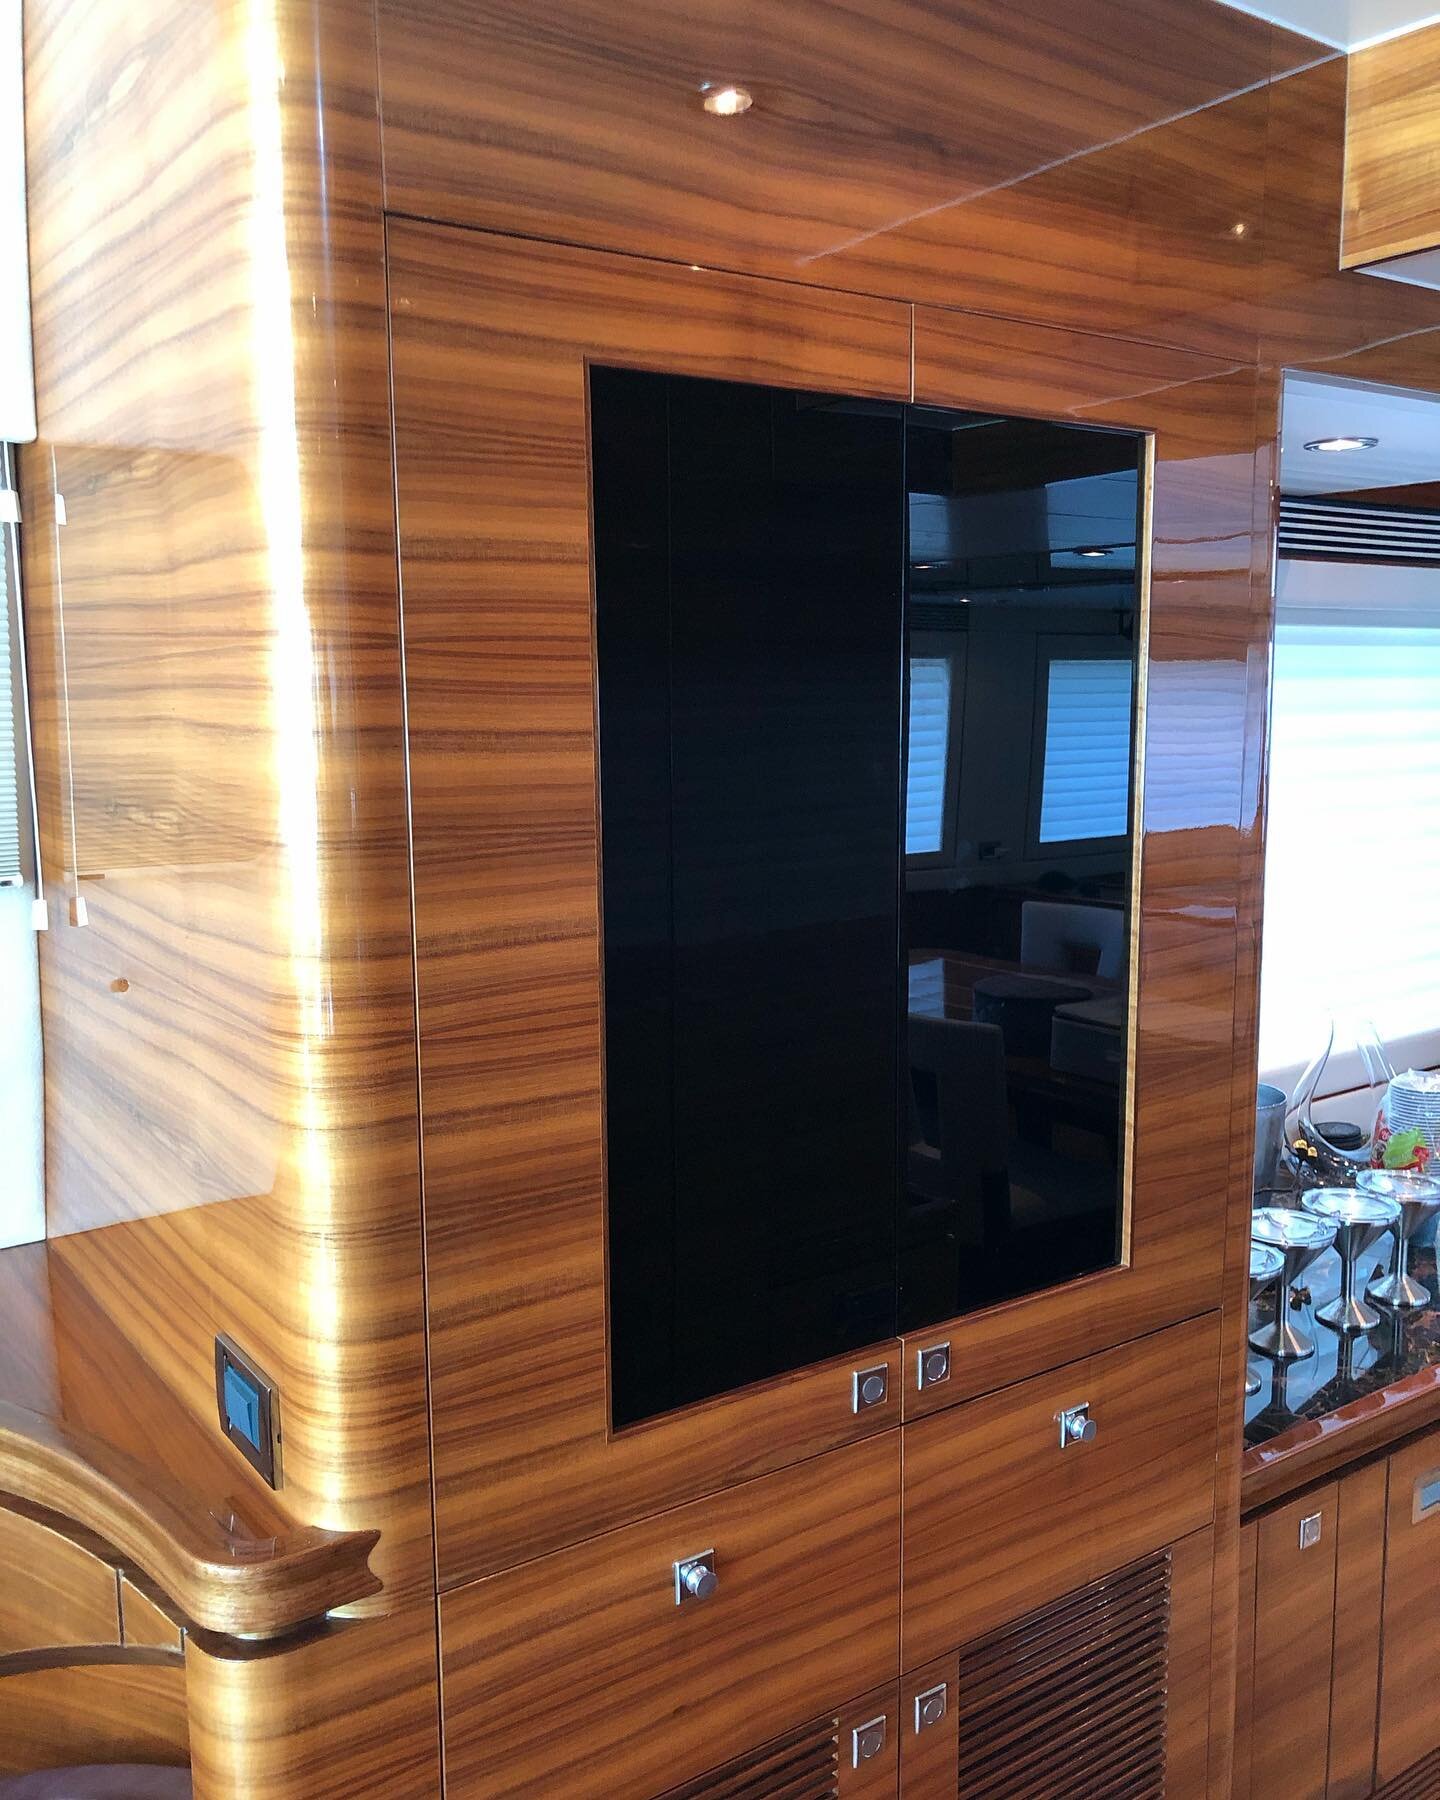 Successful install of this pantry organization insert aboard this beautiful horizon.  The starboard is cut to locate the storage containers and can be pulled out if a bare shelf is desired.  Simple and effective #yacht #woodworking